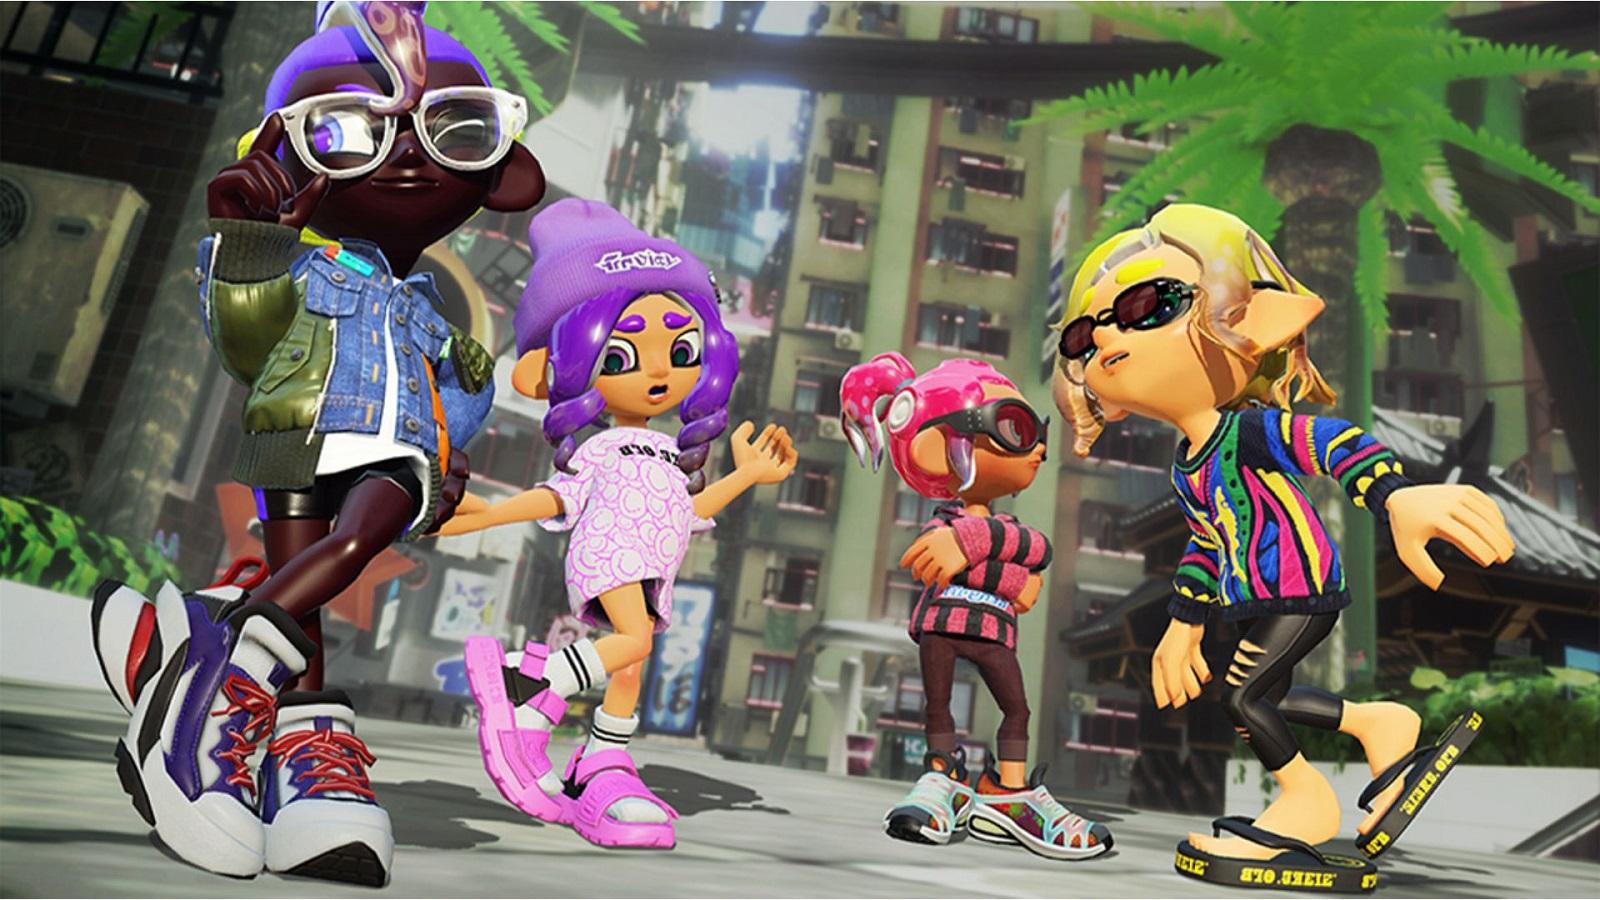 Splatoon 3 characters in the lobby